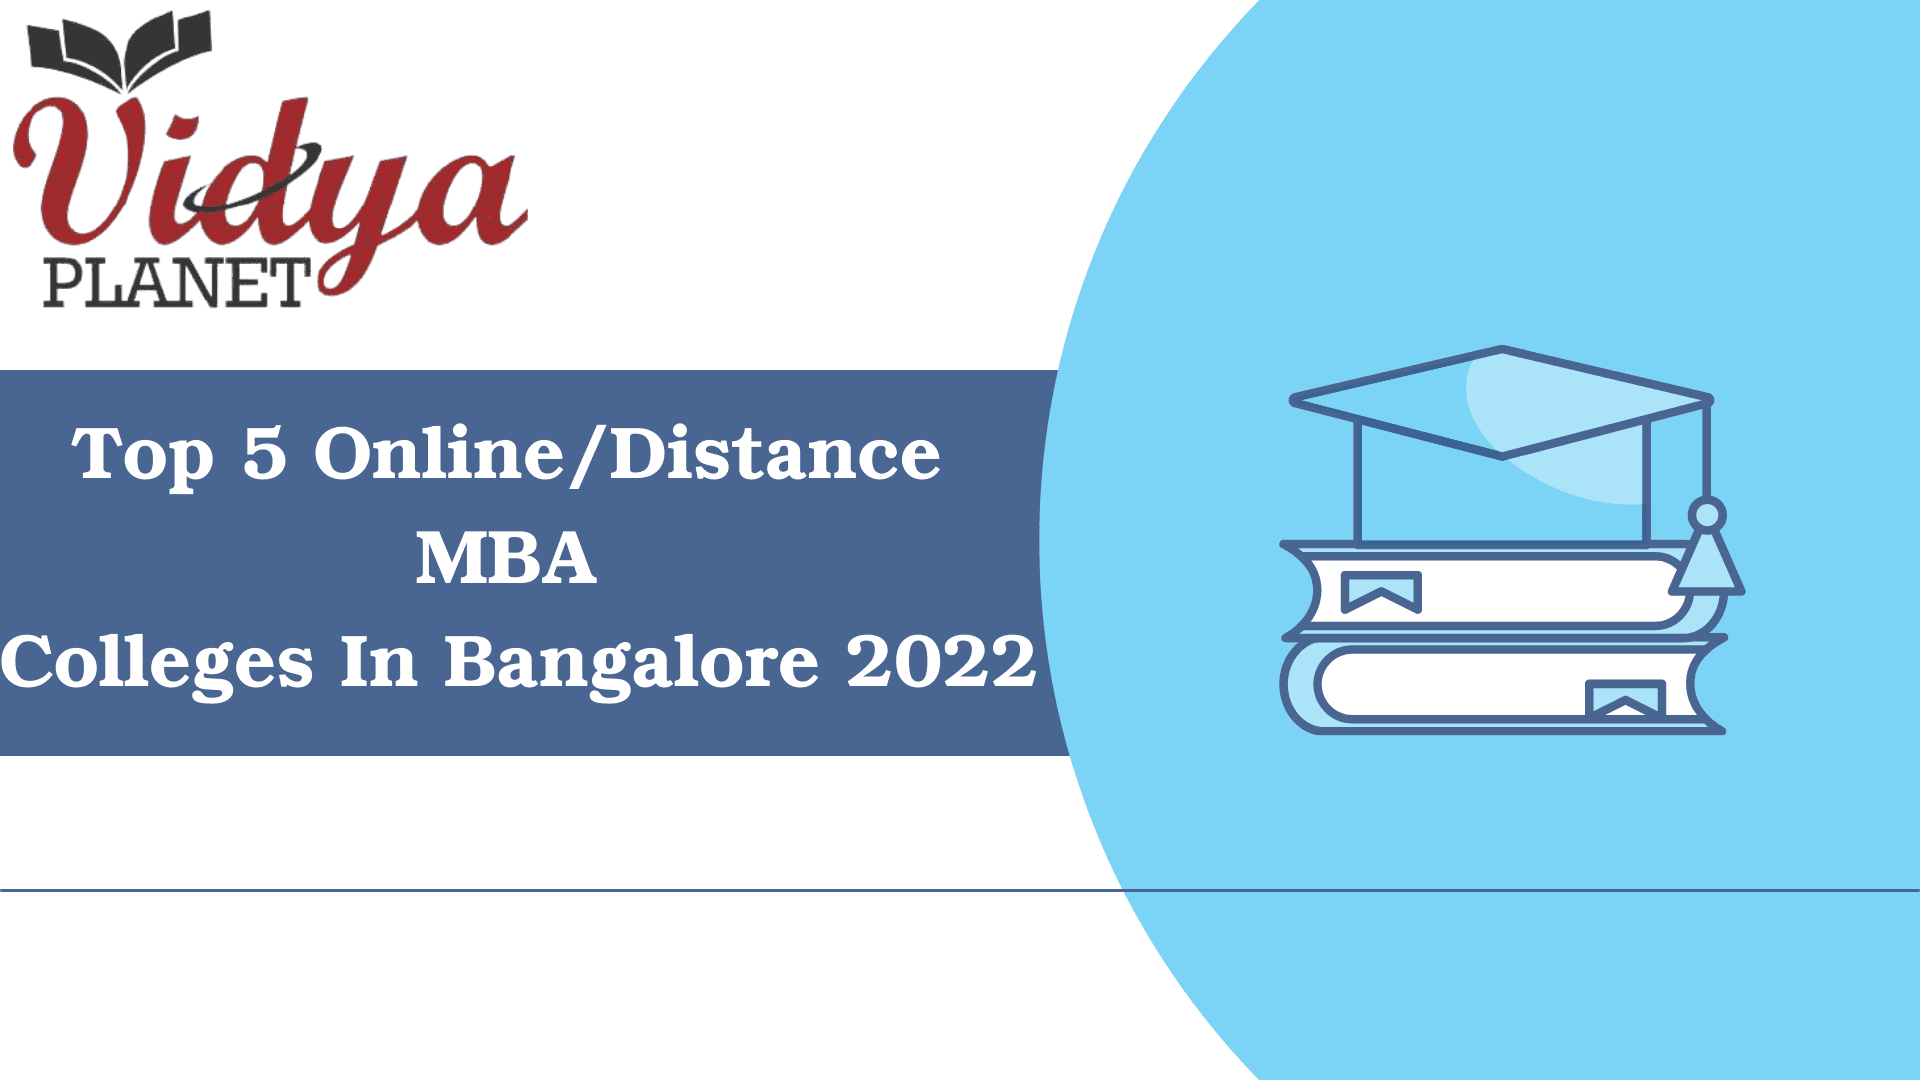 Top 5 Online/Distance MBA Colleges In Bangalore 2022